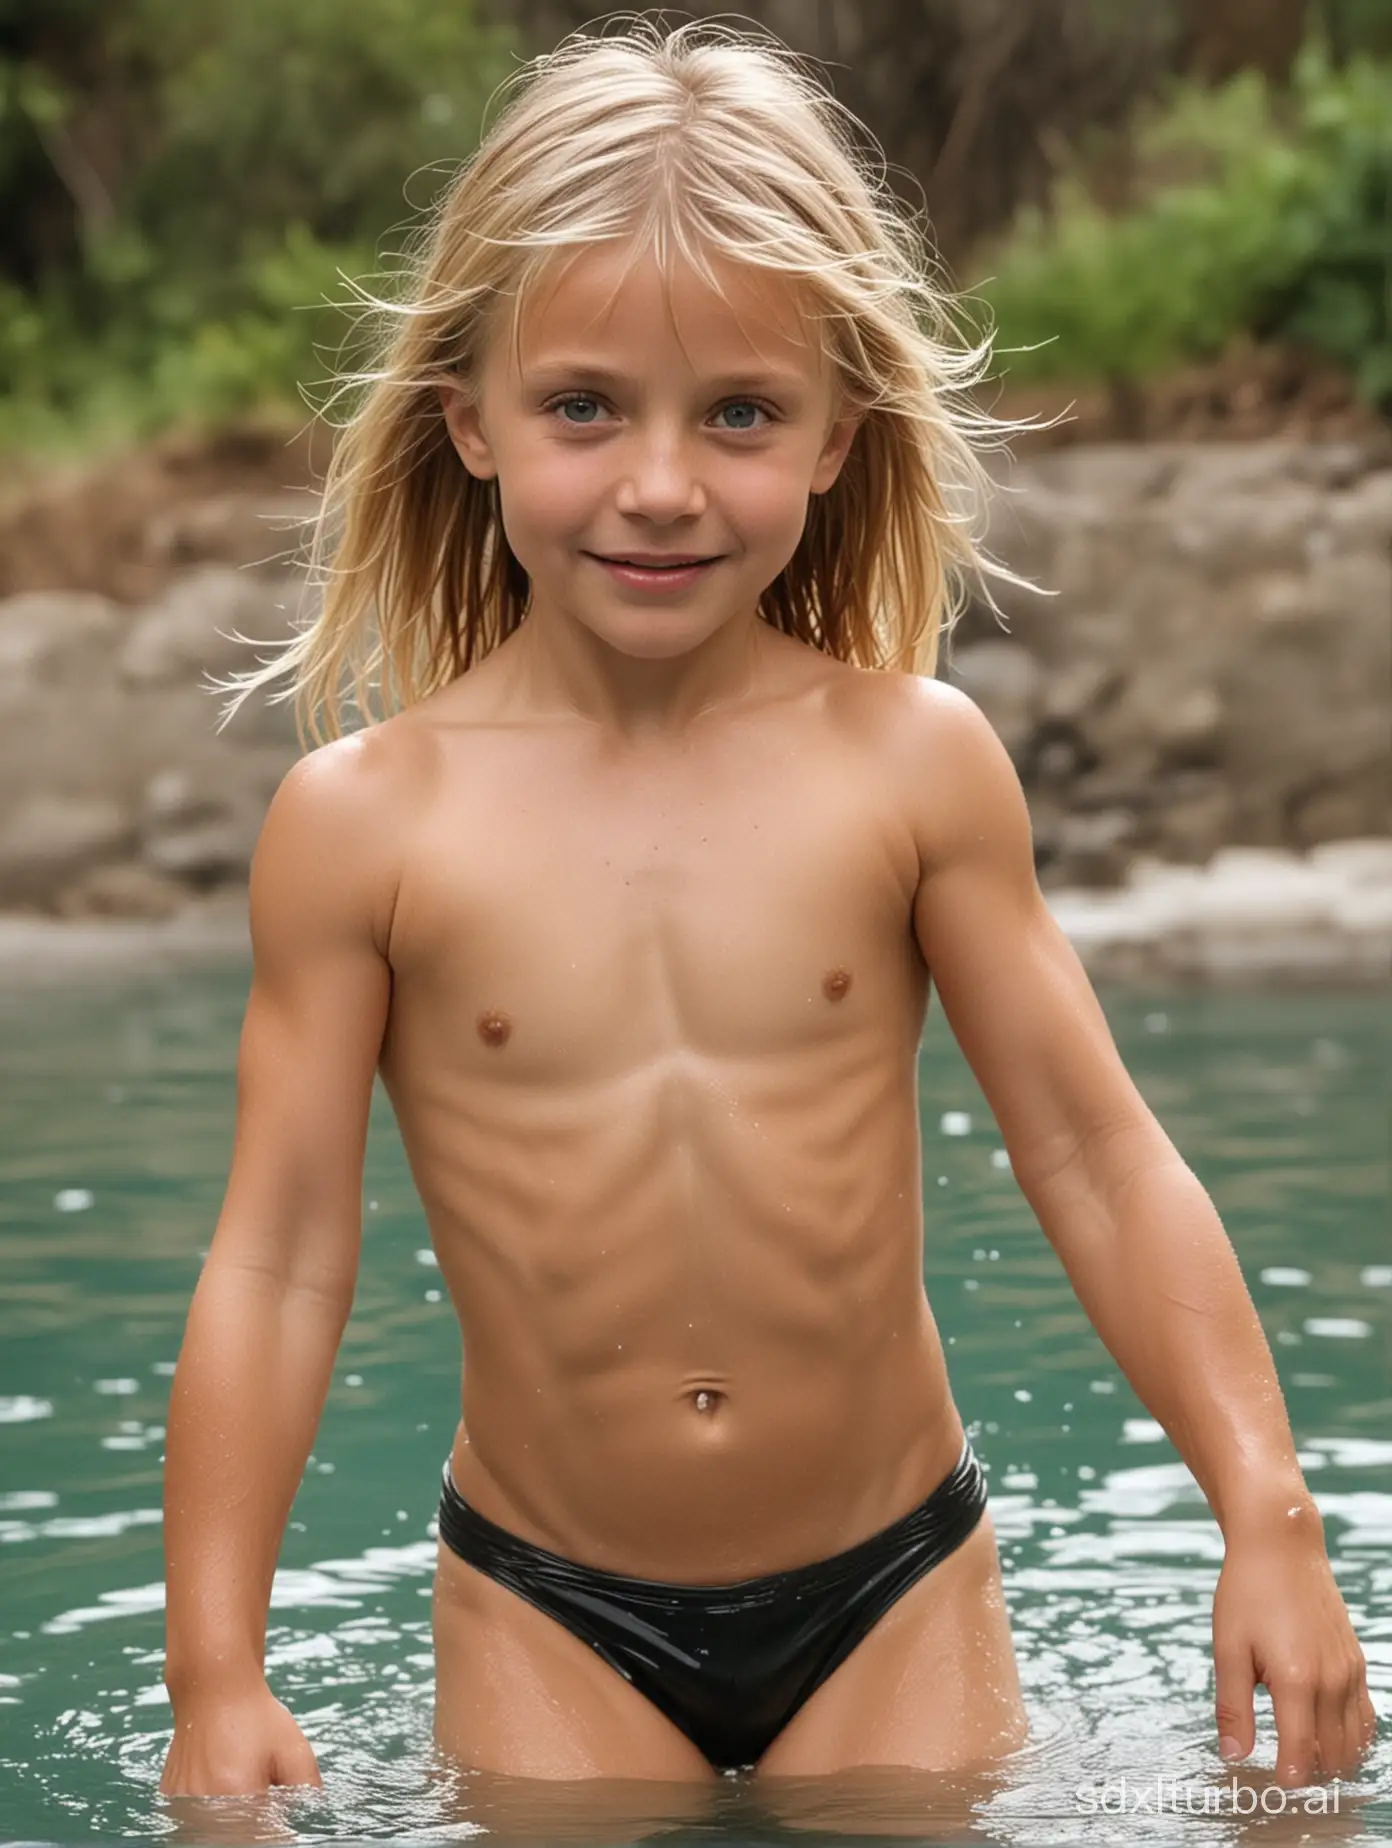 Childhood-Fitness-Young-Cameron-Diaz-with-Defined-Abs-Bathing